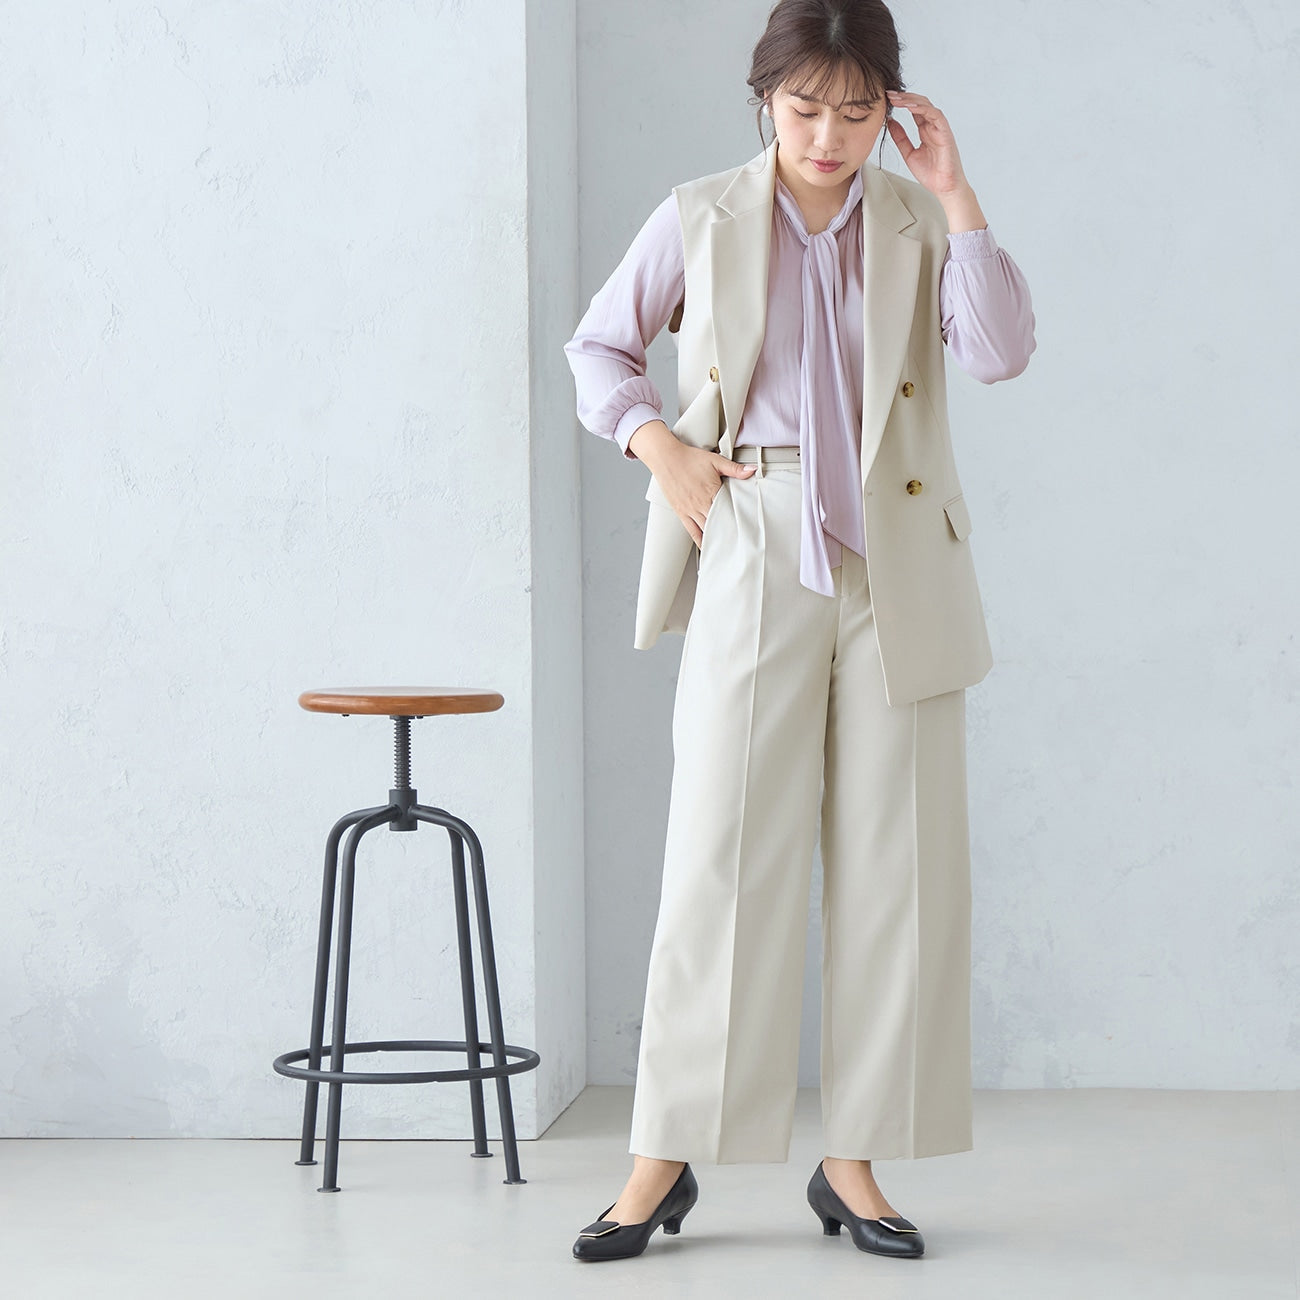 2-Way Stretch Twill Off-White Wide Pants